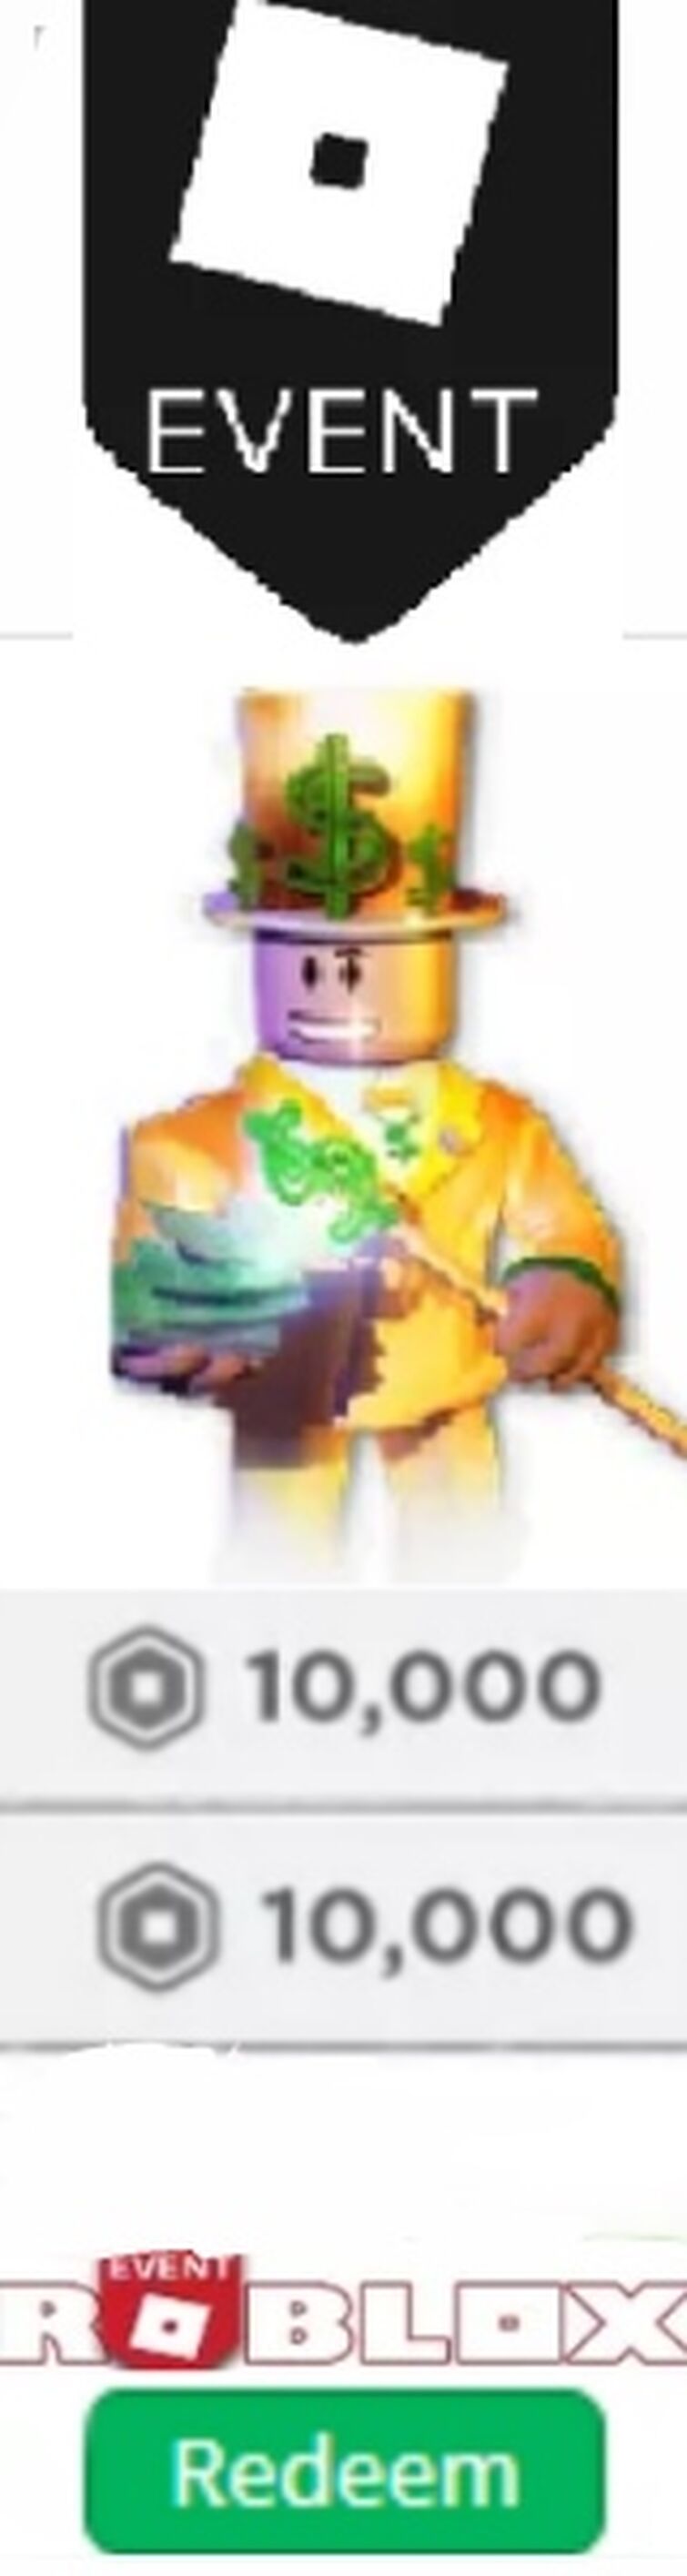 Roblox Ad Meme Except I Re Used A Joke From A Post From Weeks Ago Fandom - how bad can roblox be